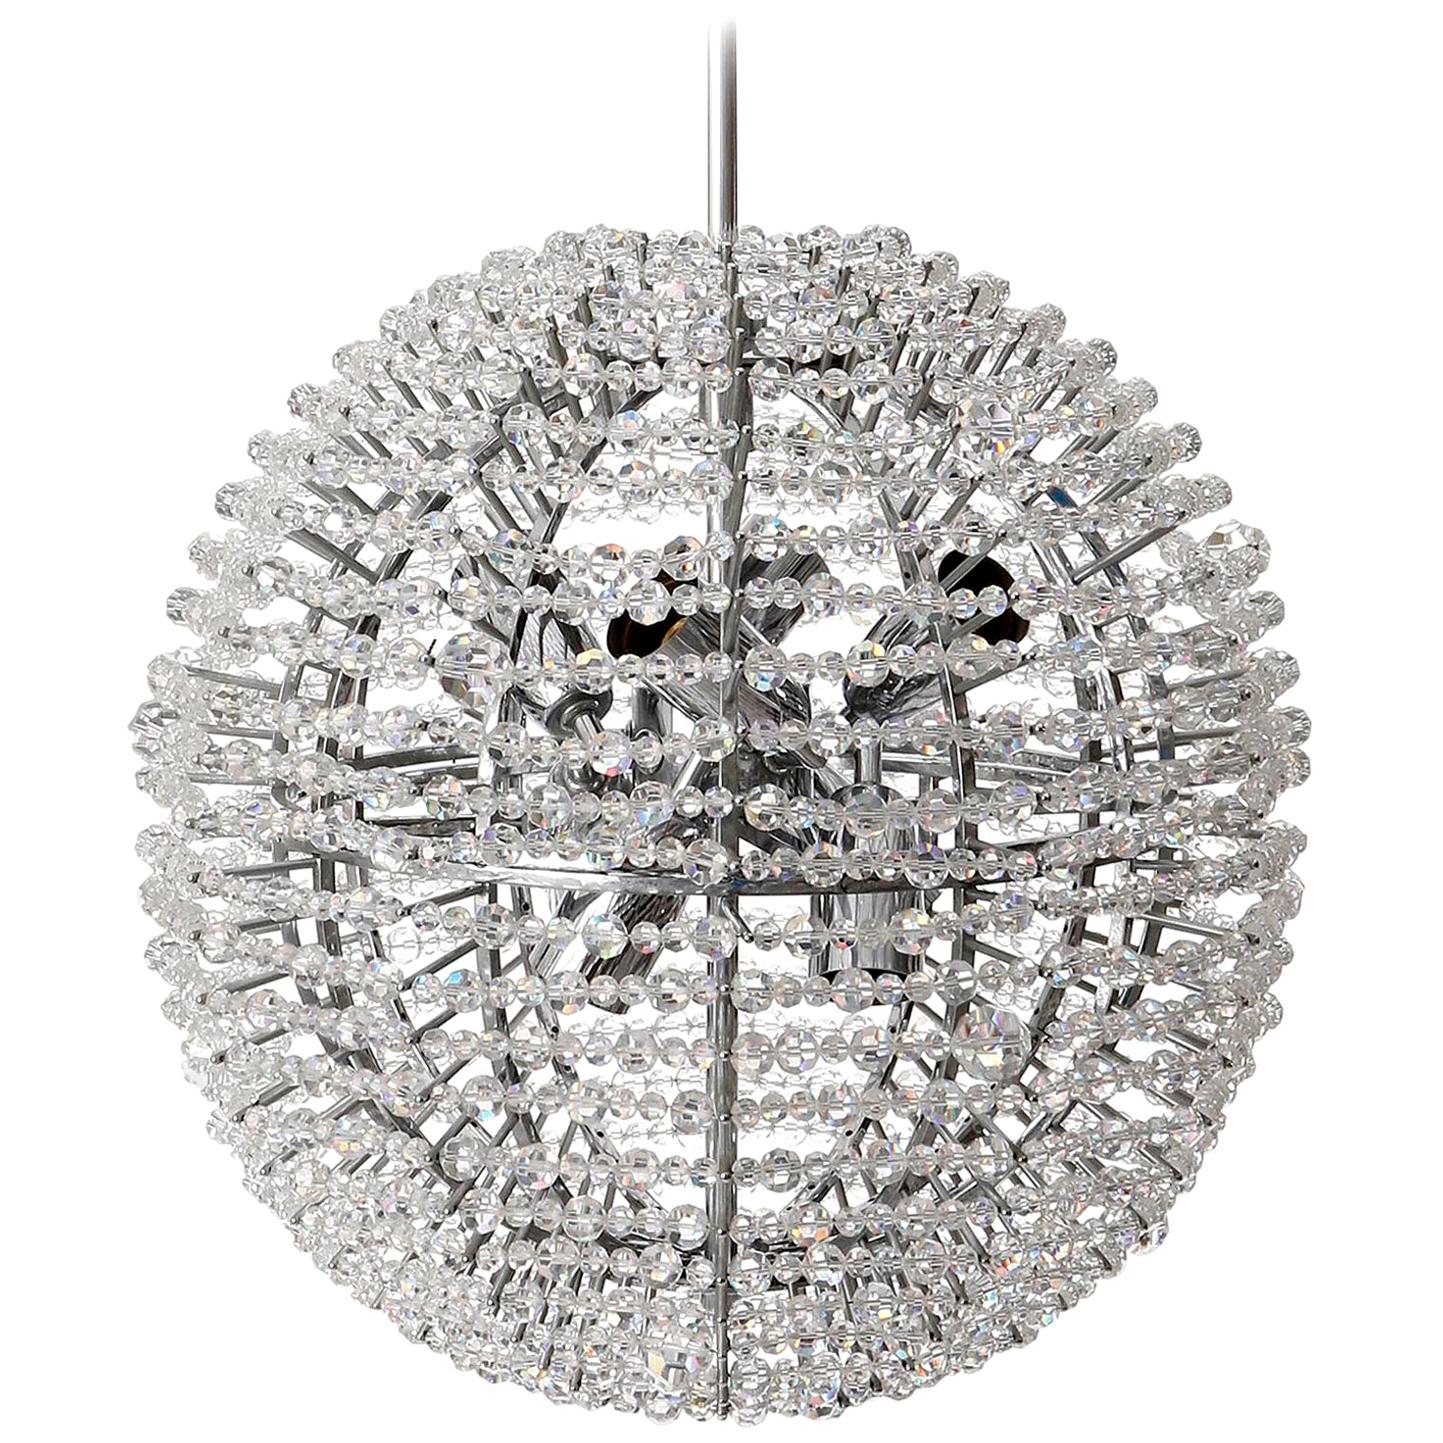 European One of Two Bakalowits Chandeliers 'Supernova', Nickel Crystal Glass, 1960s For Sale